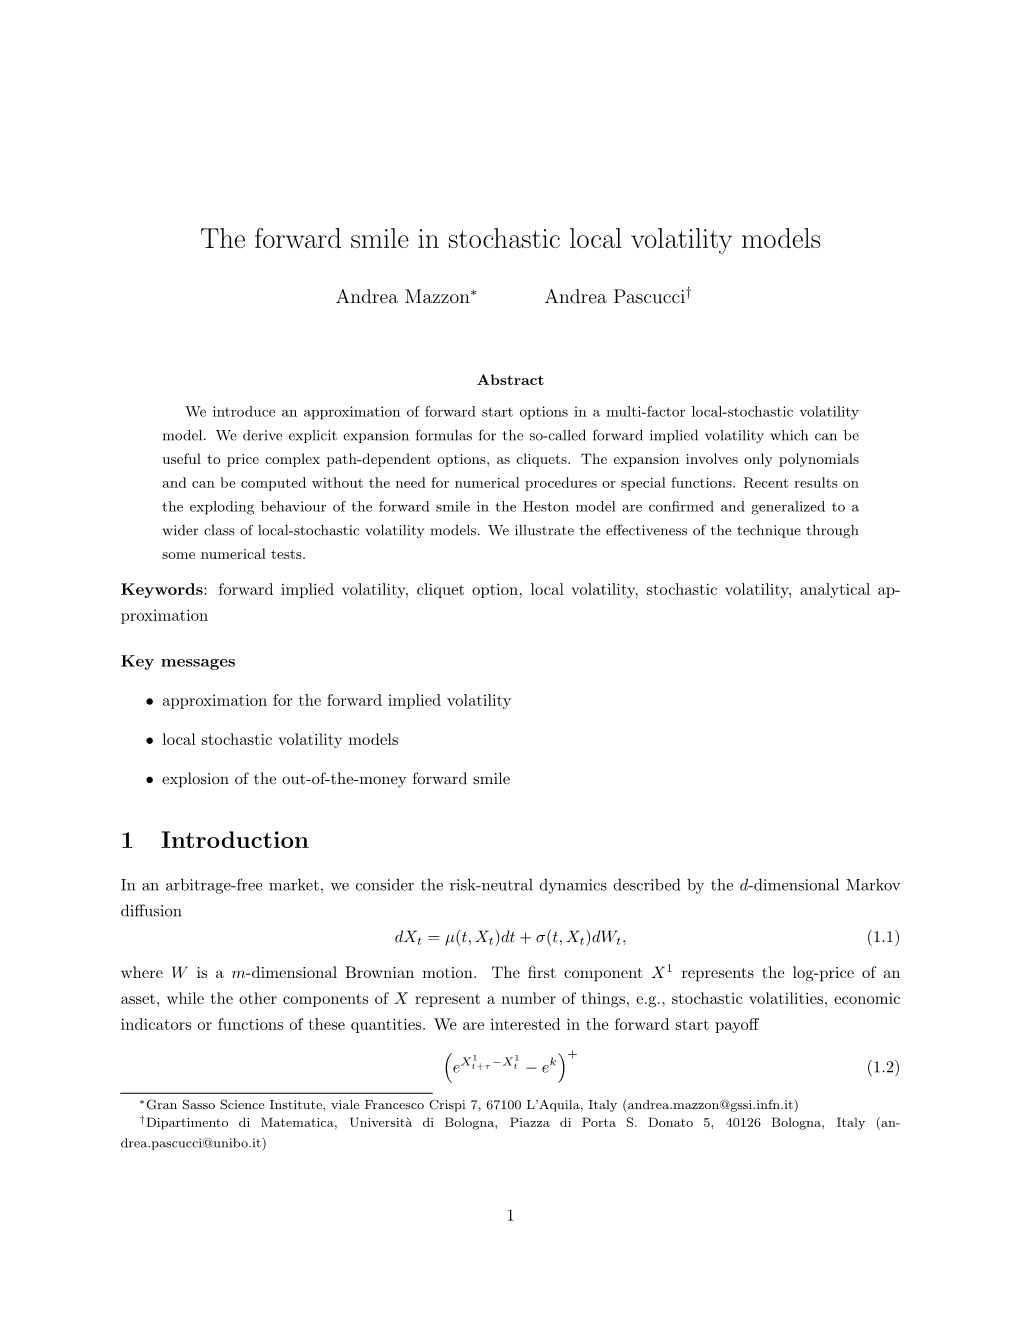 The Forward Smile in Stochastic Local Volatility Models